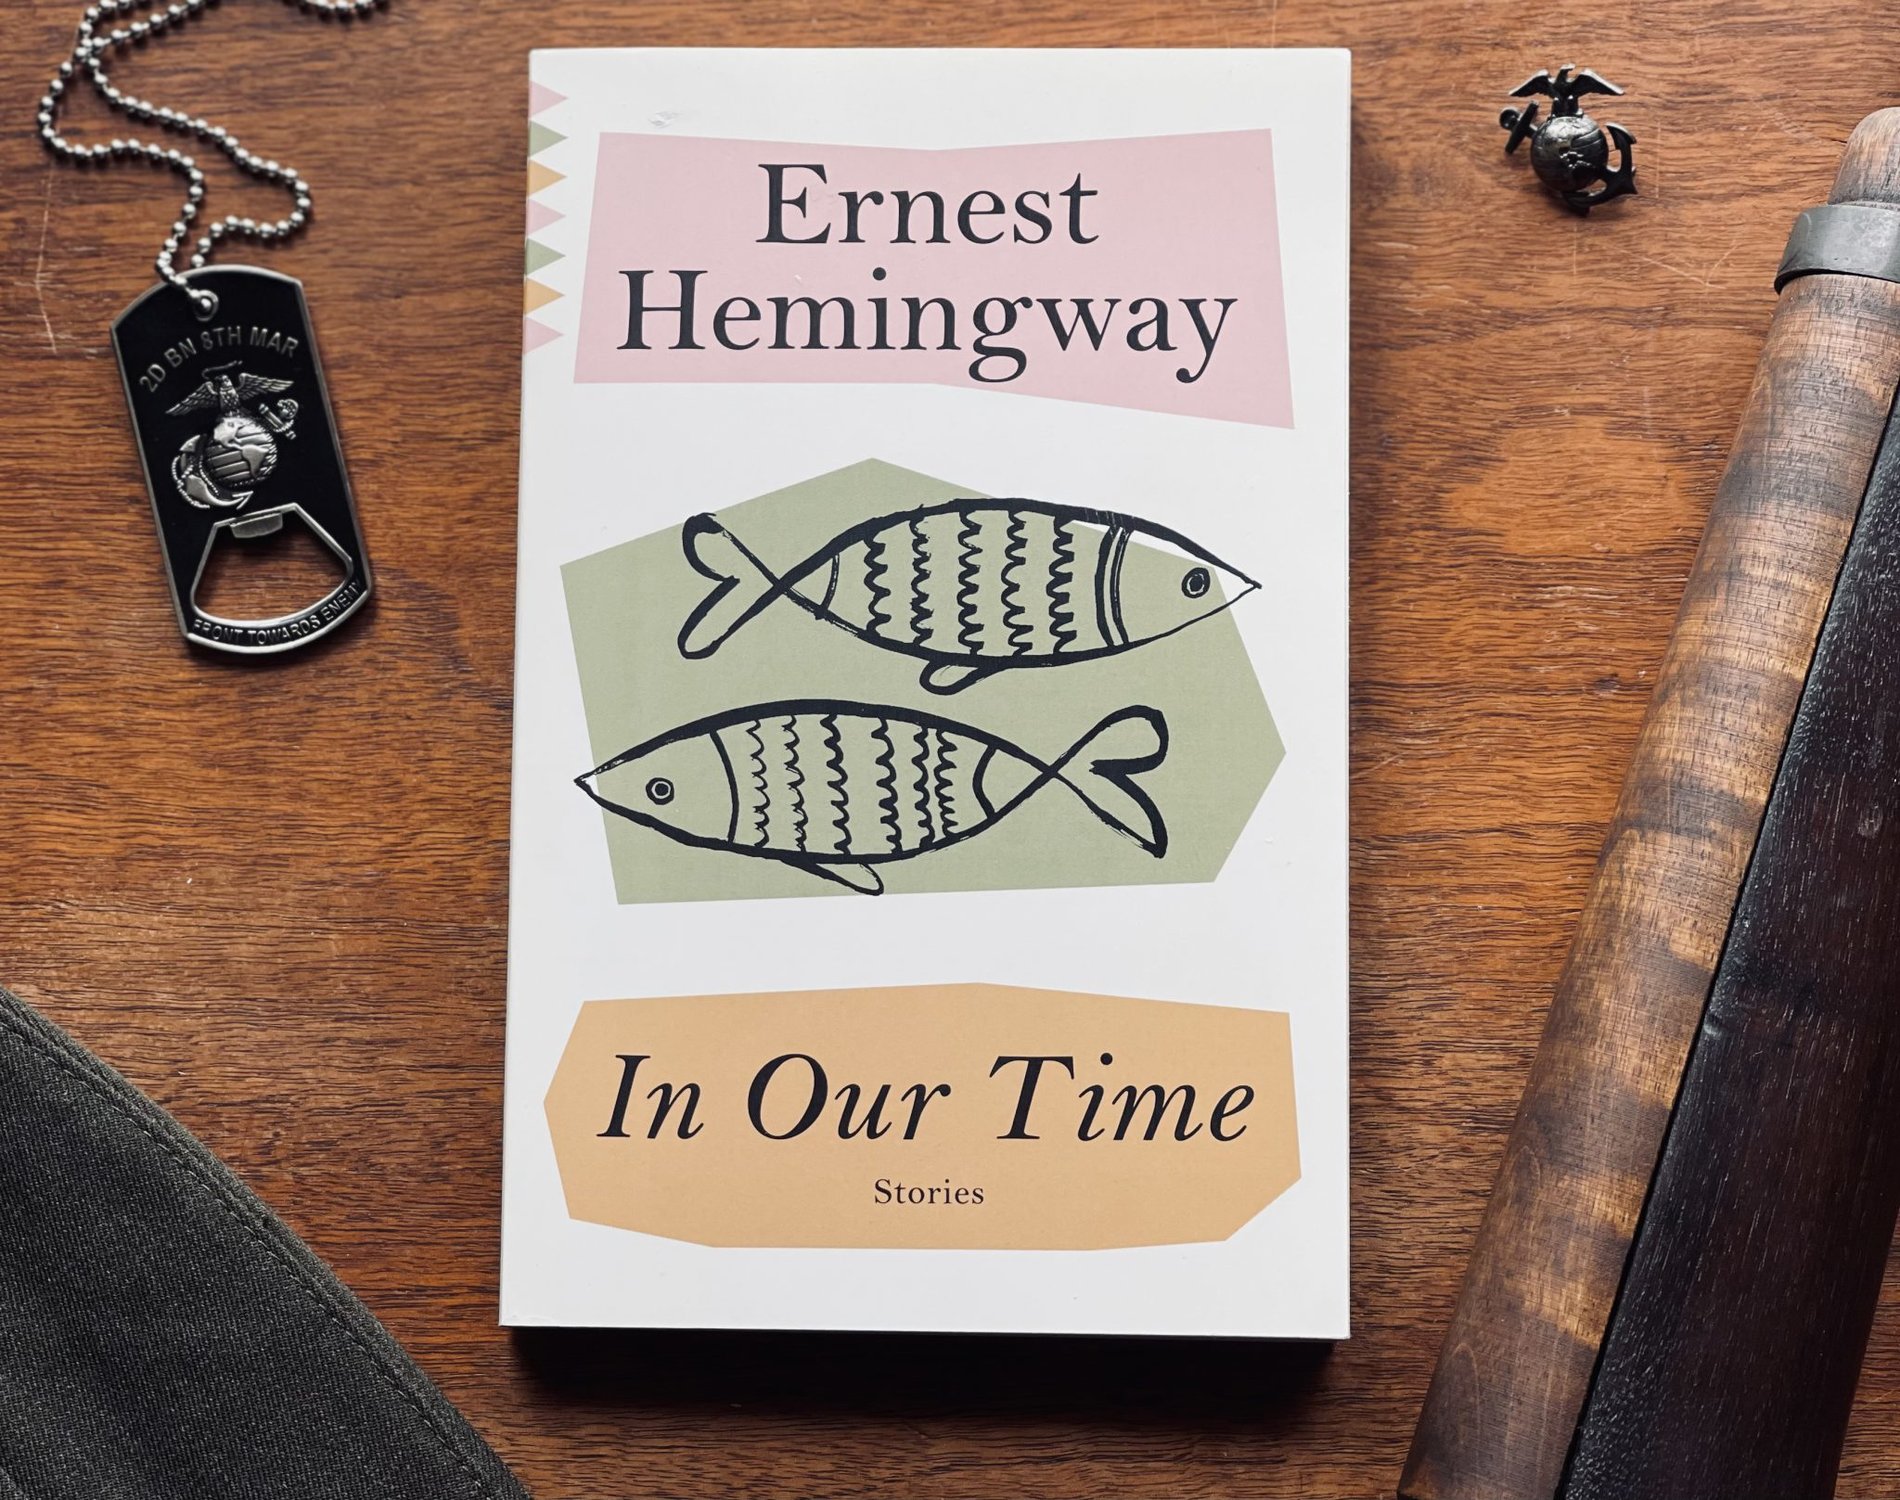 Soldier's Home, In Our Time, Hemingway